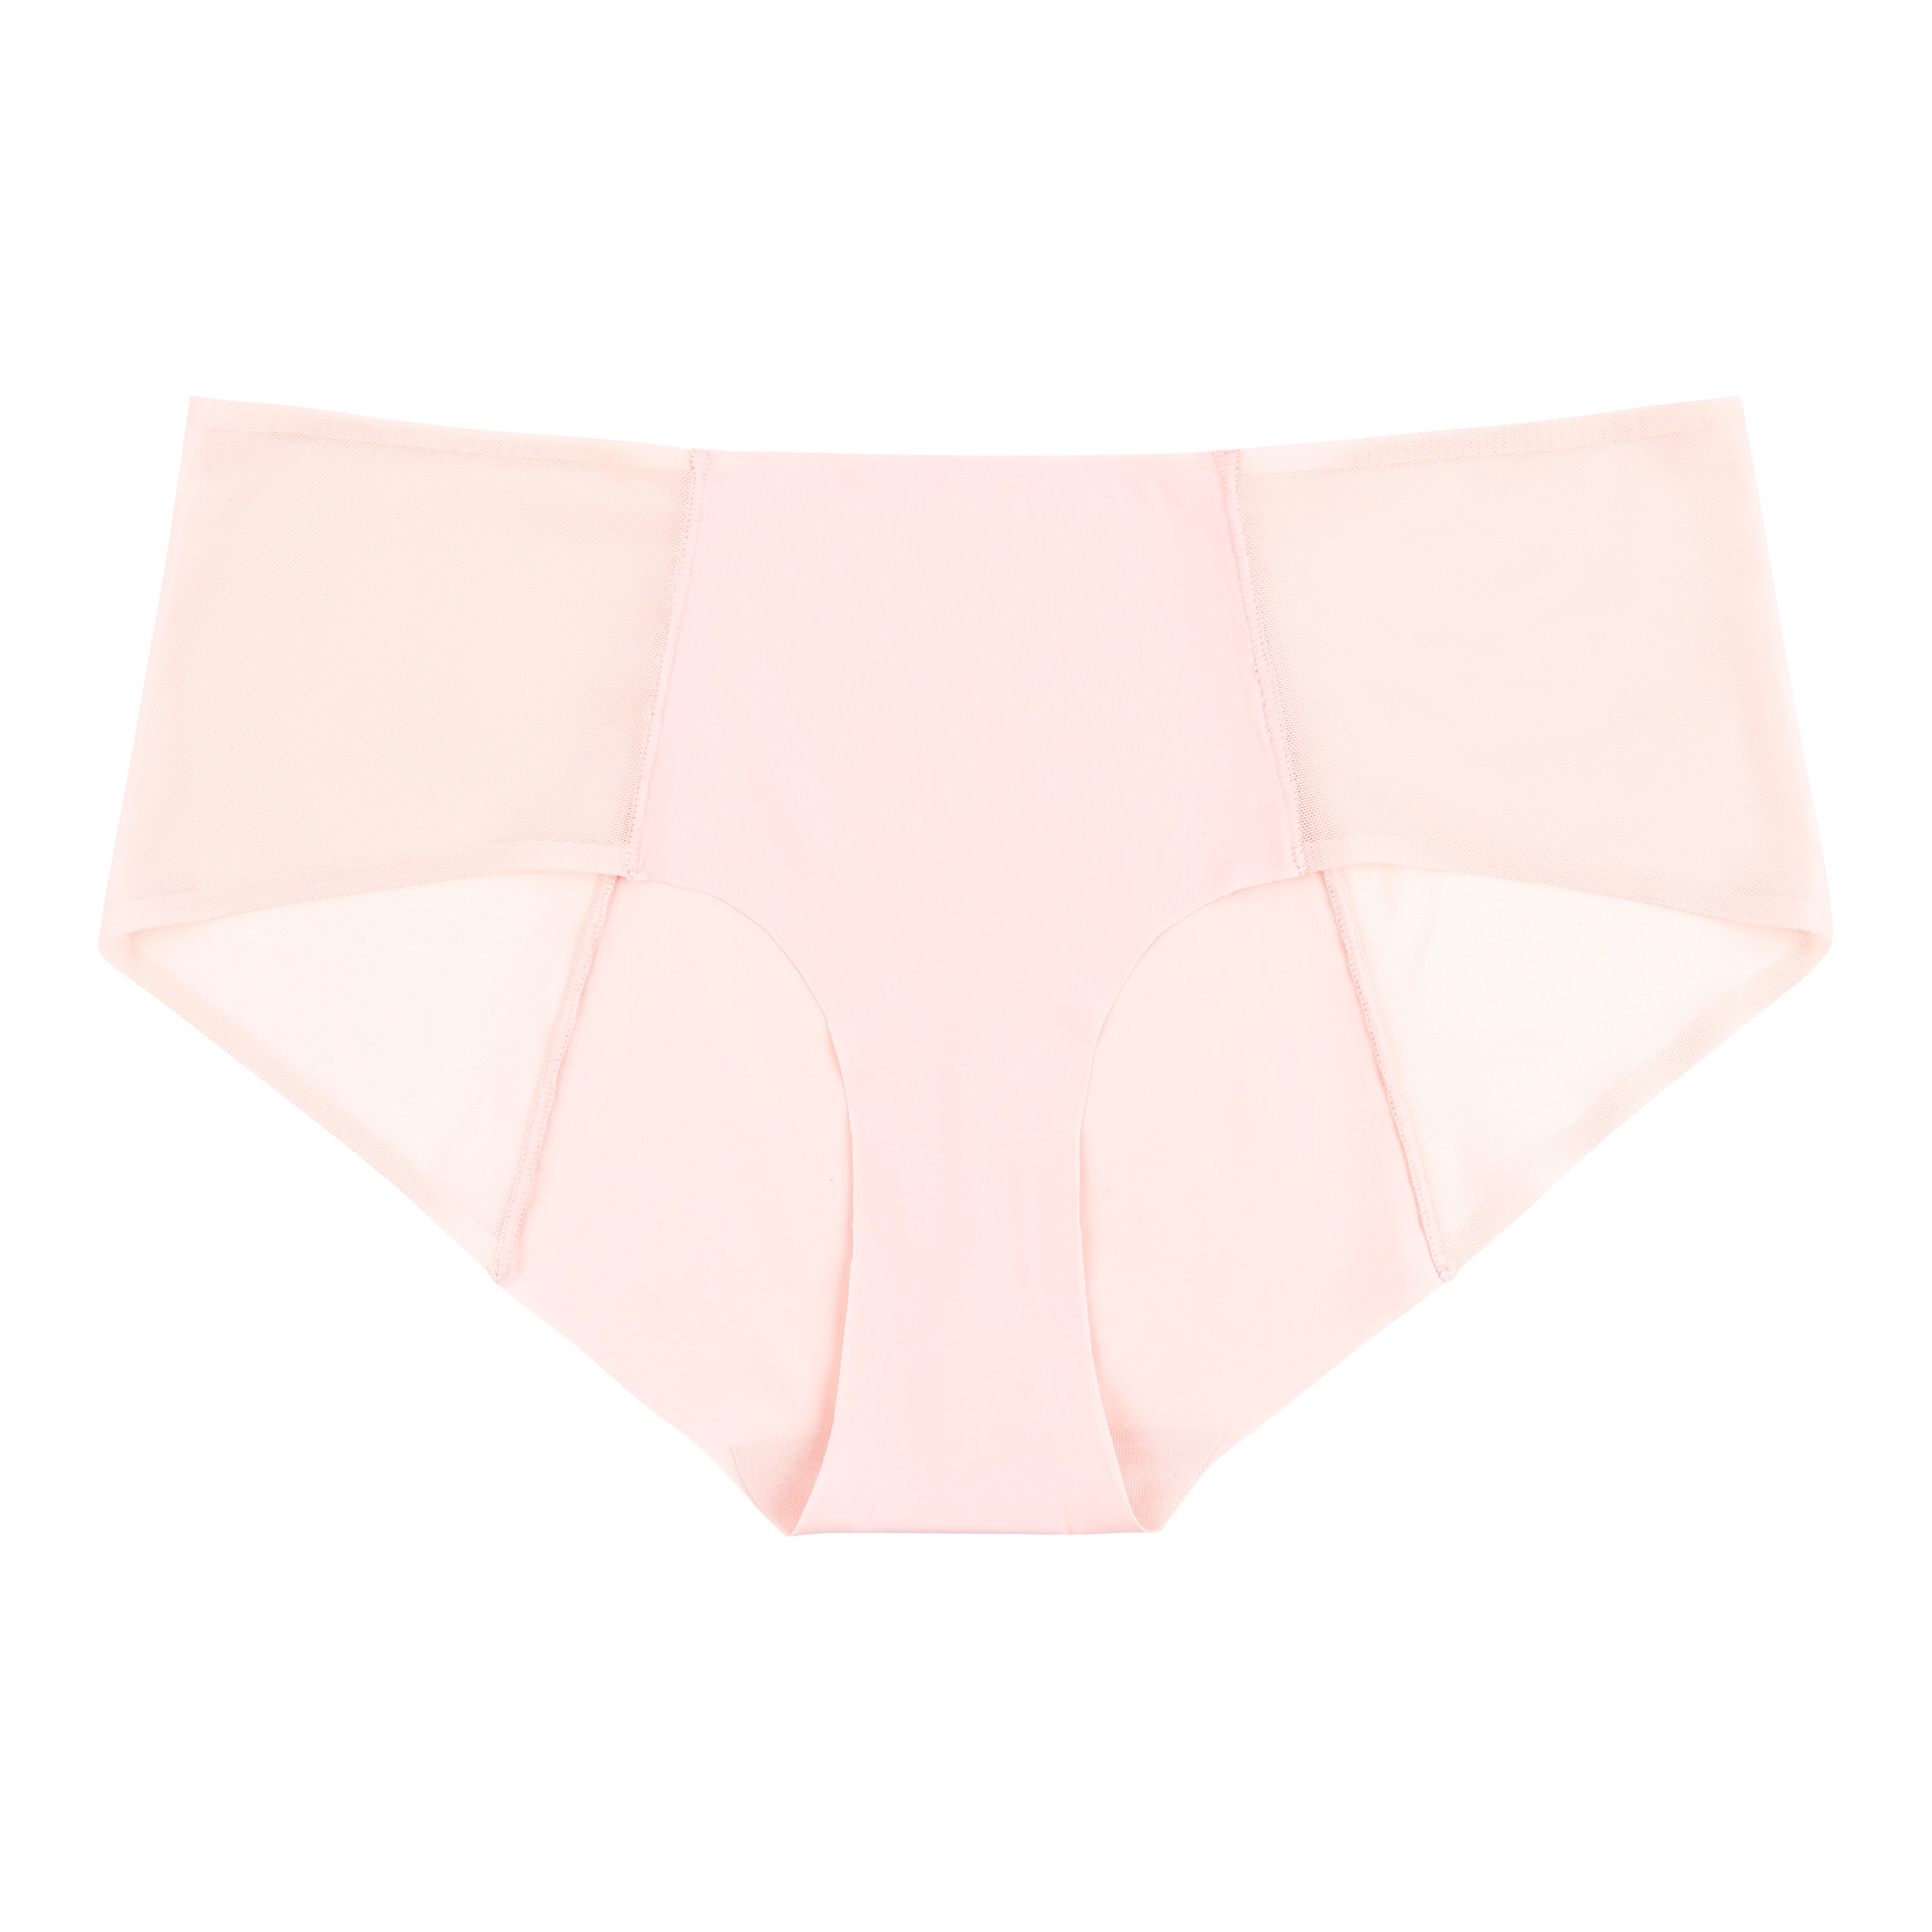 Buy Umiwear Seamless Breathable Panty online